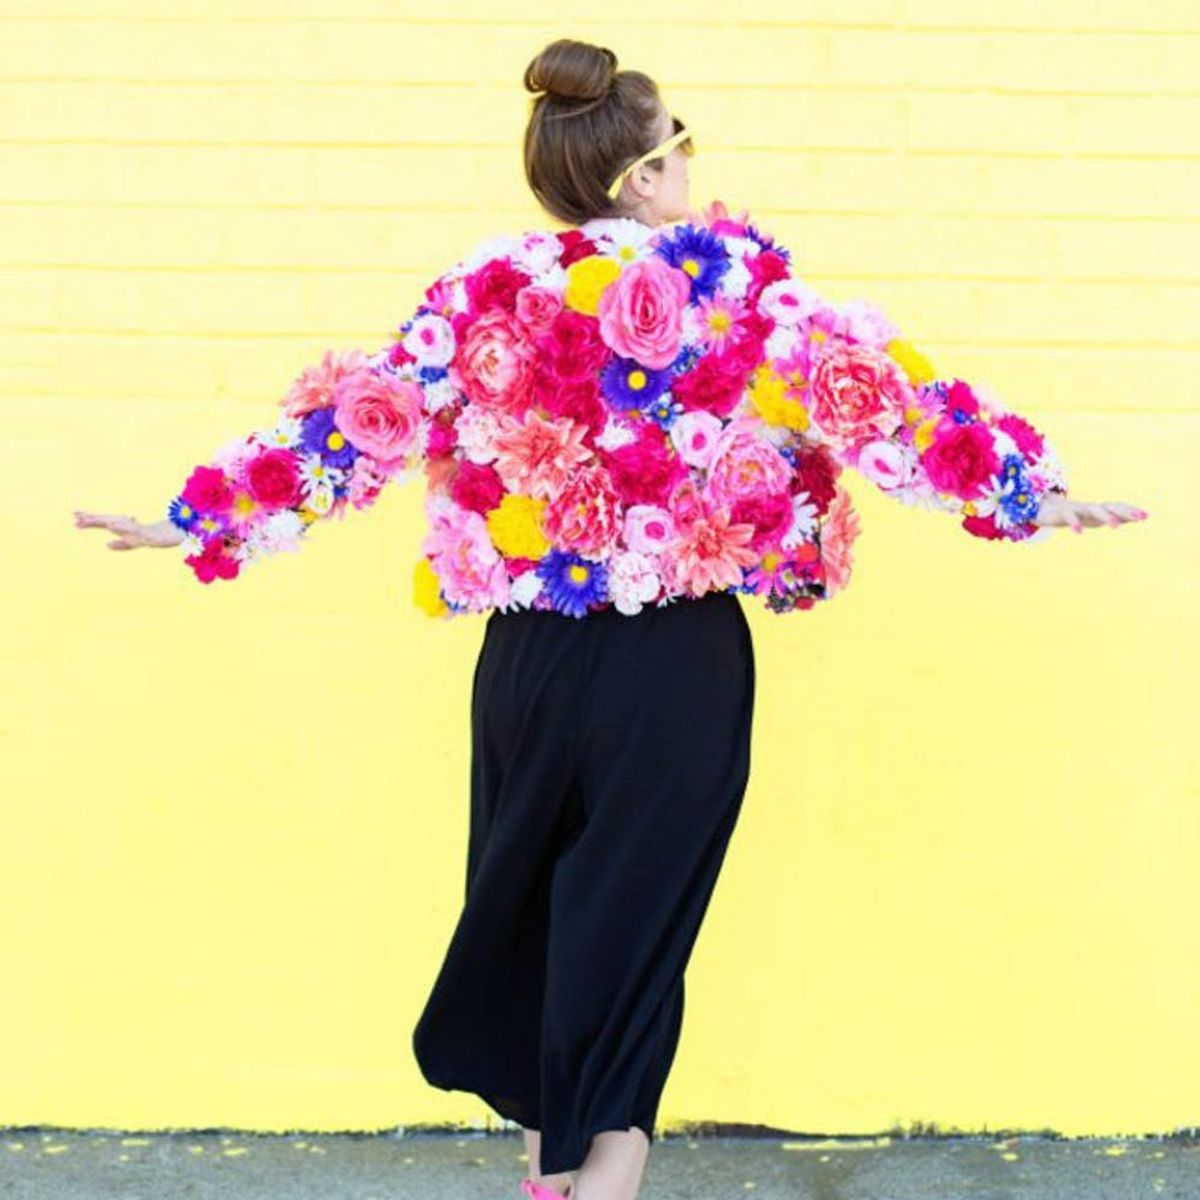 16 Floral DIYs That’ll Get You Pumped for Spring